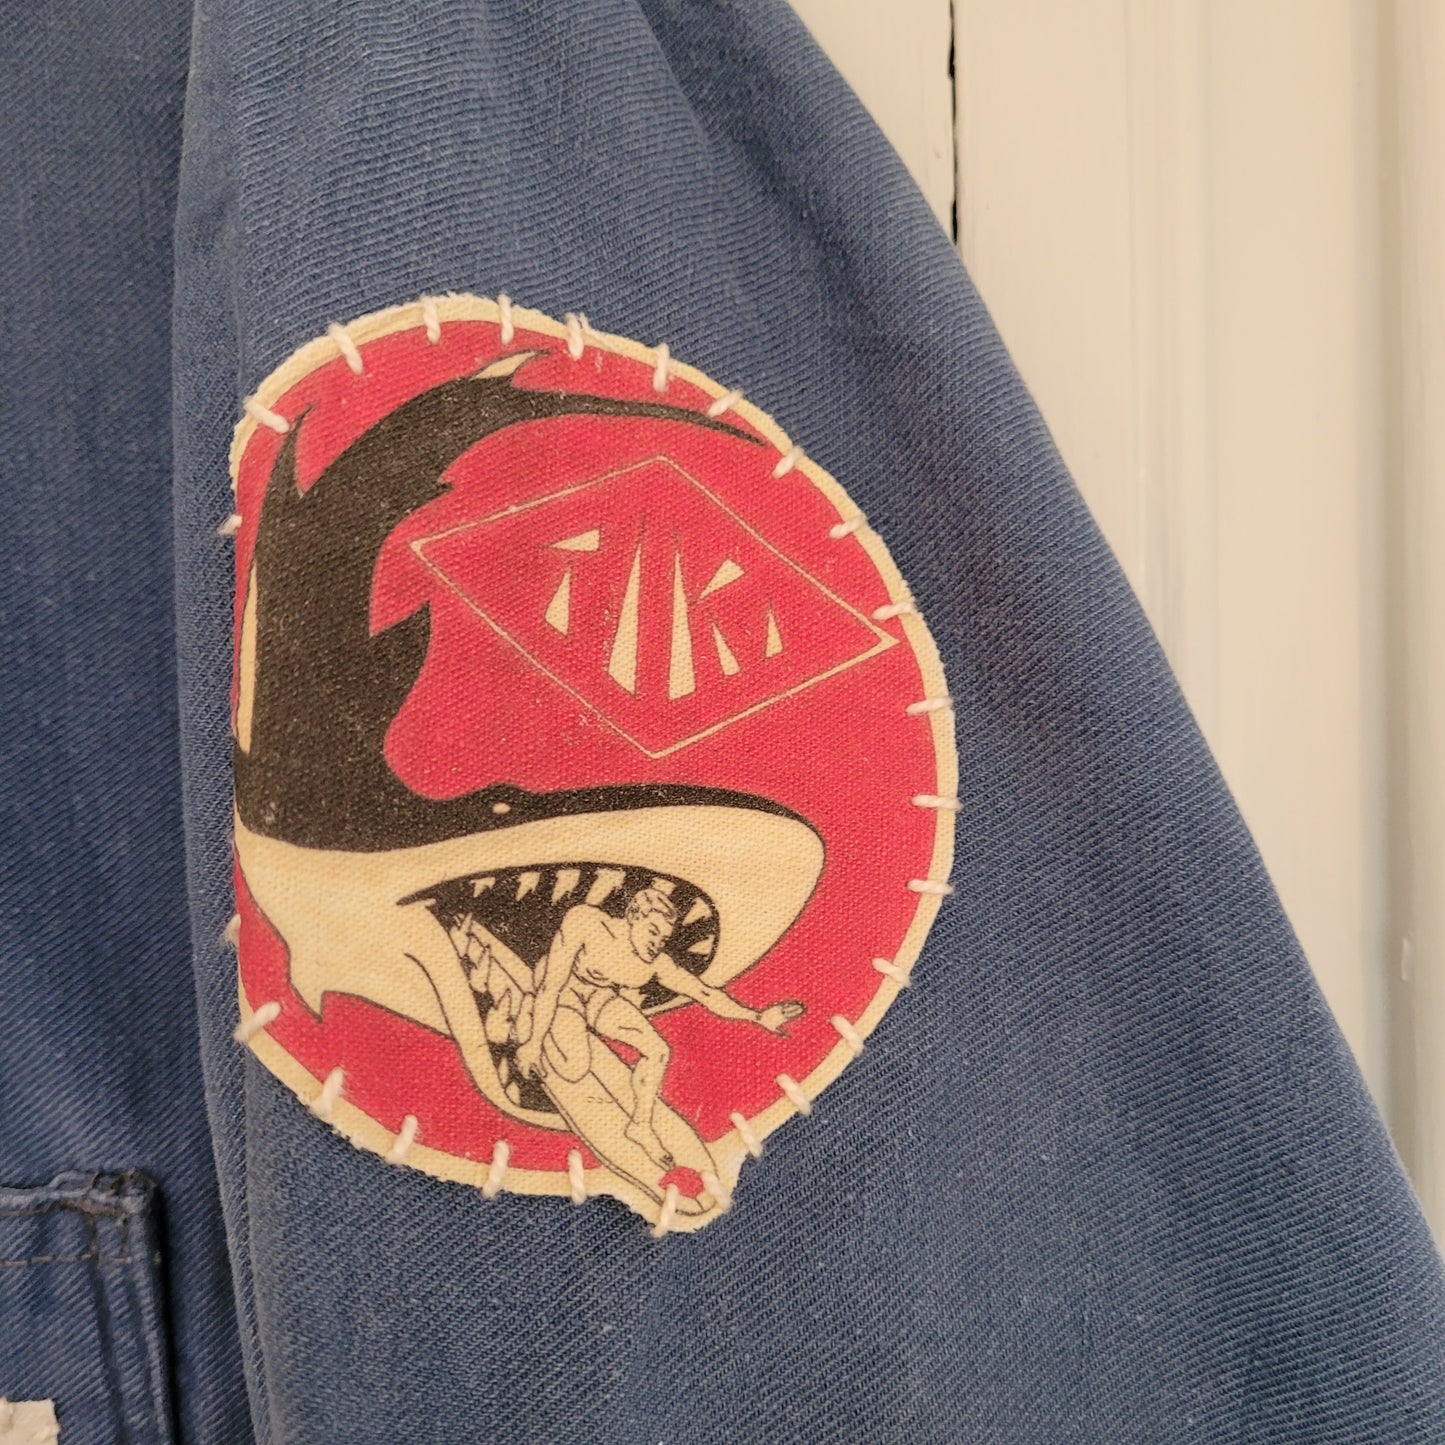 In loving memory of ED "Big Daddy" Roth handpainted french 50's workwear jacket SurFinkl